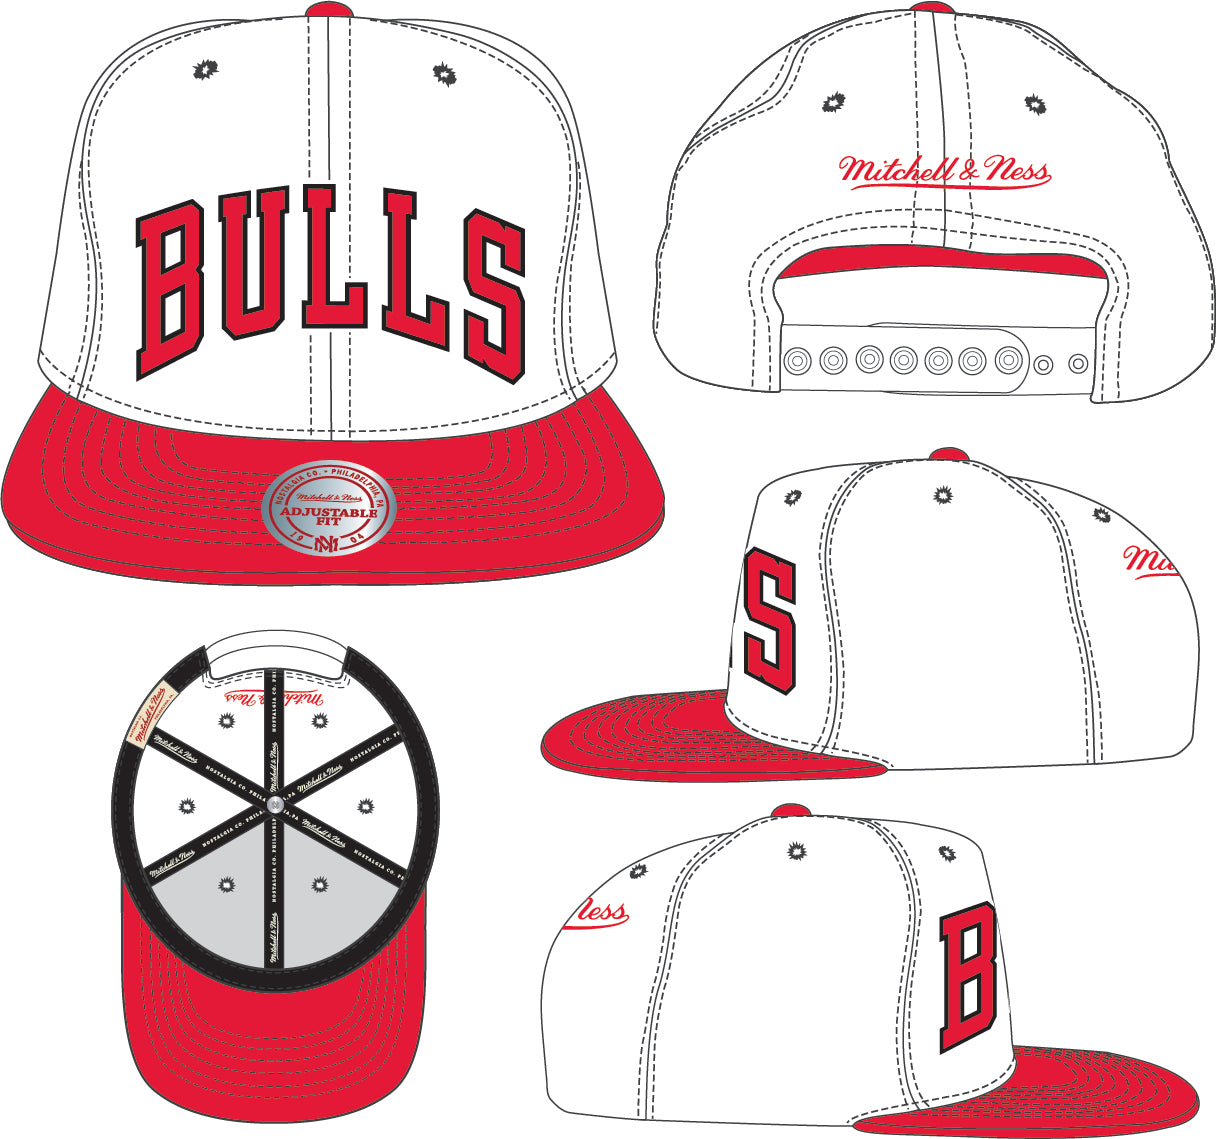 Men's Mitchell & Ness Chicago Bulls Core White and Red Adjustable Snapback Hat